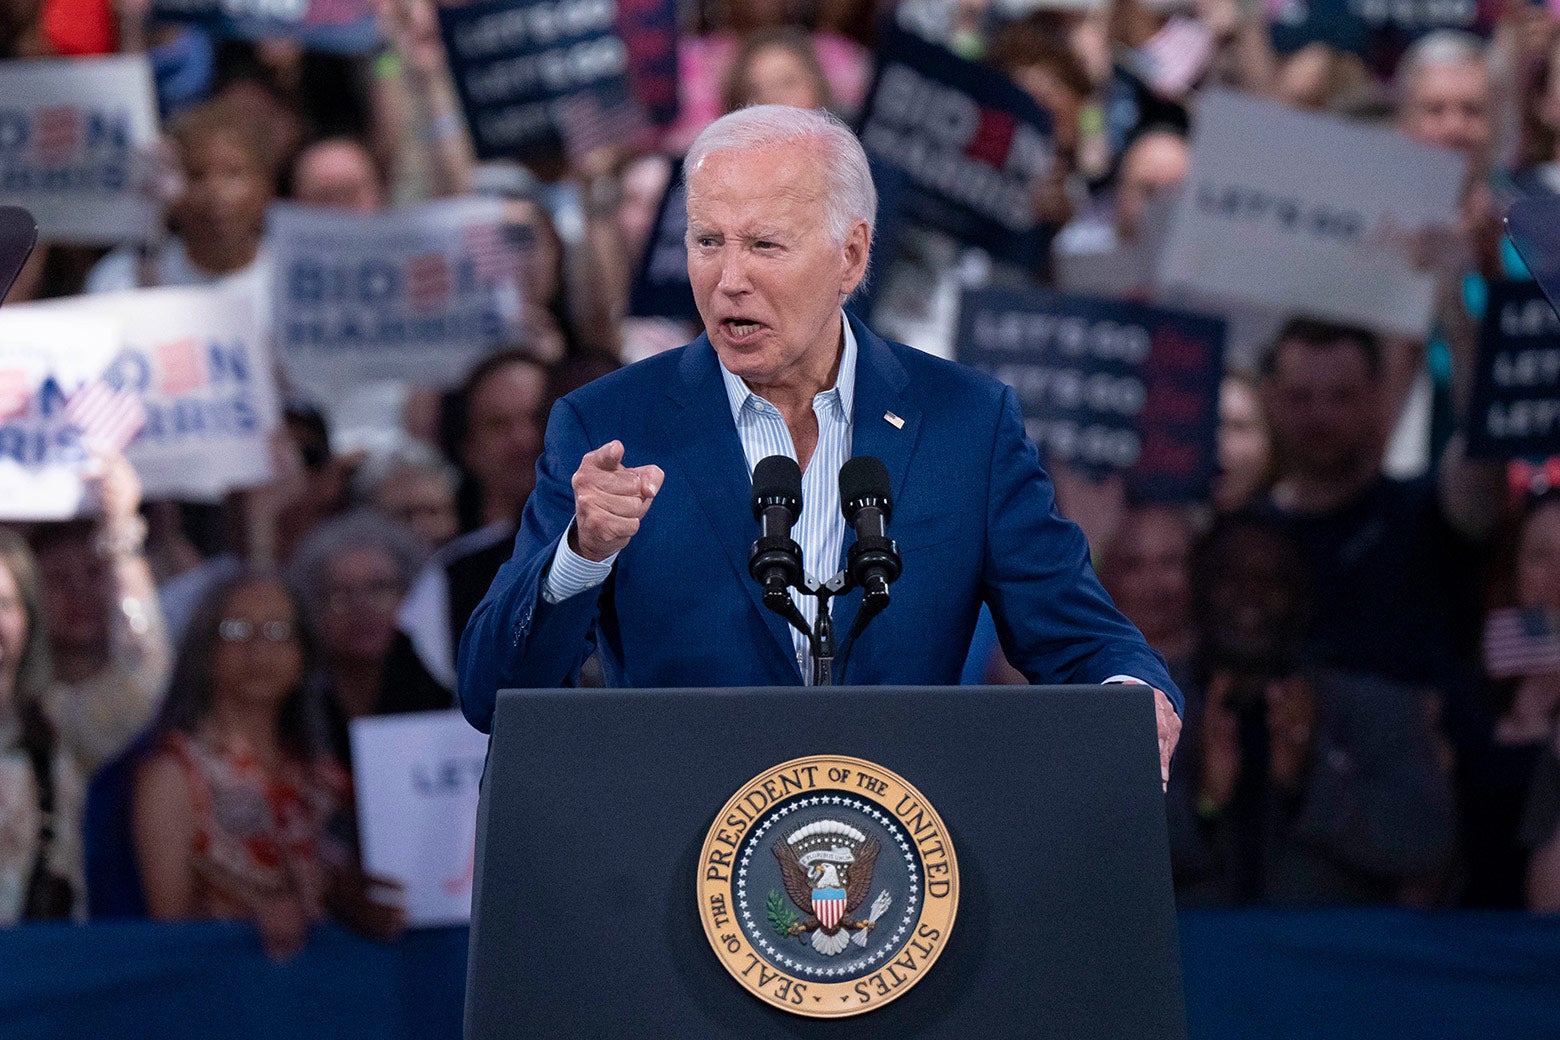 Biden Has Landed on His Justification for Staying in the Race